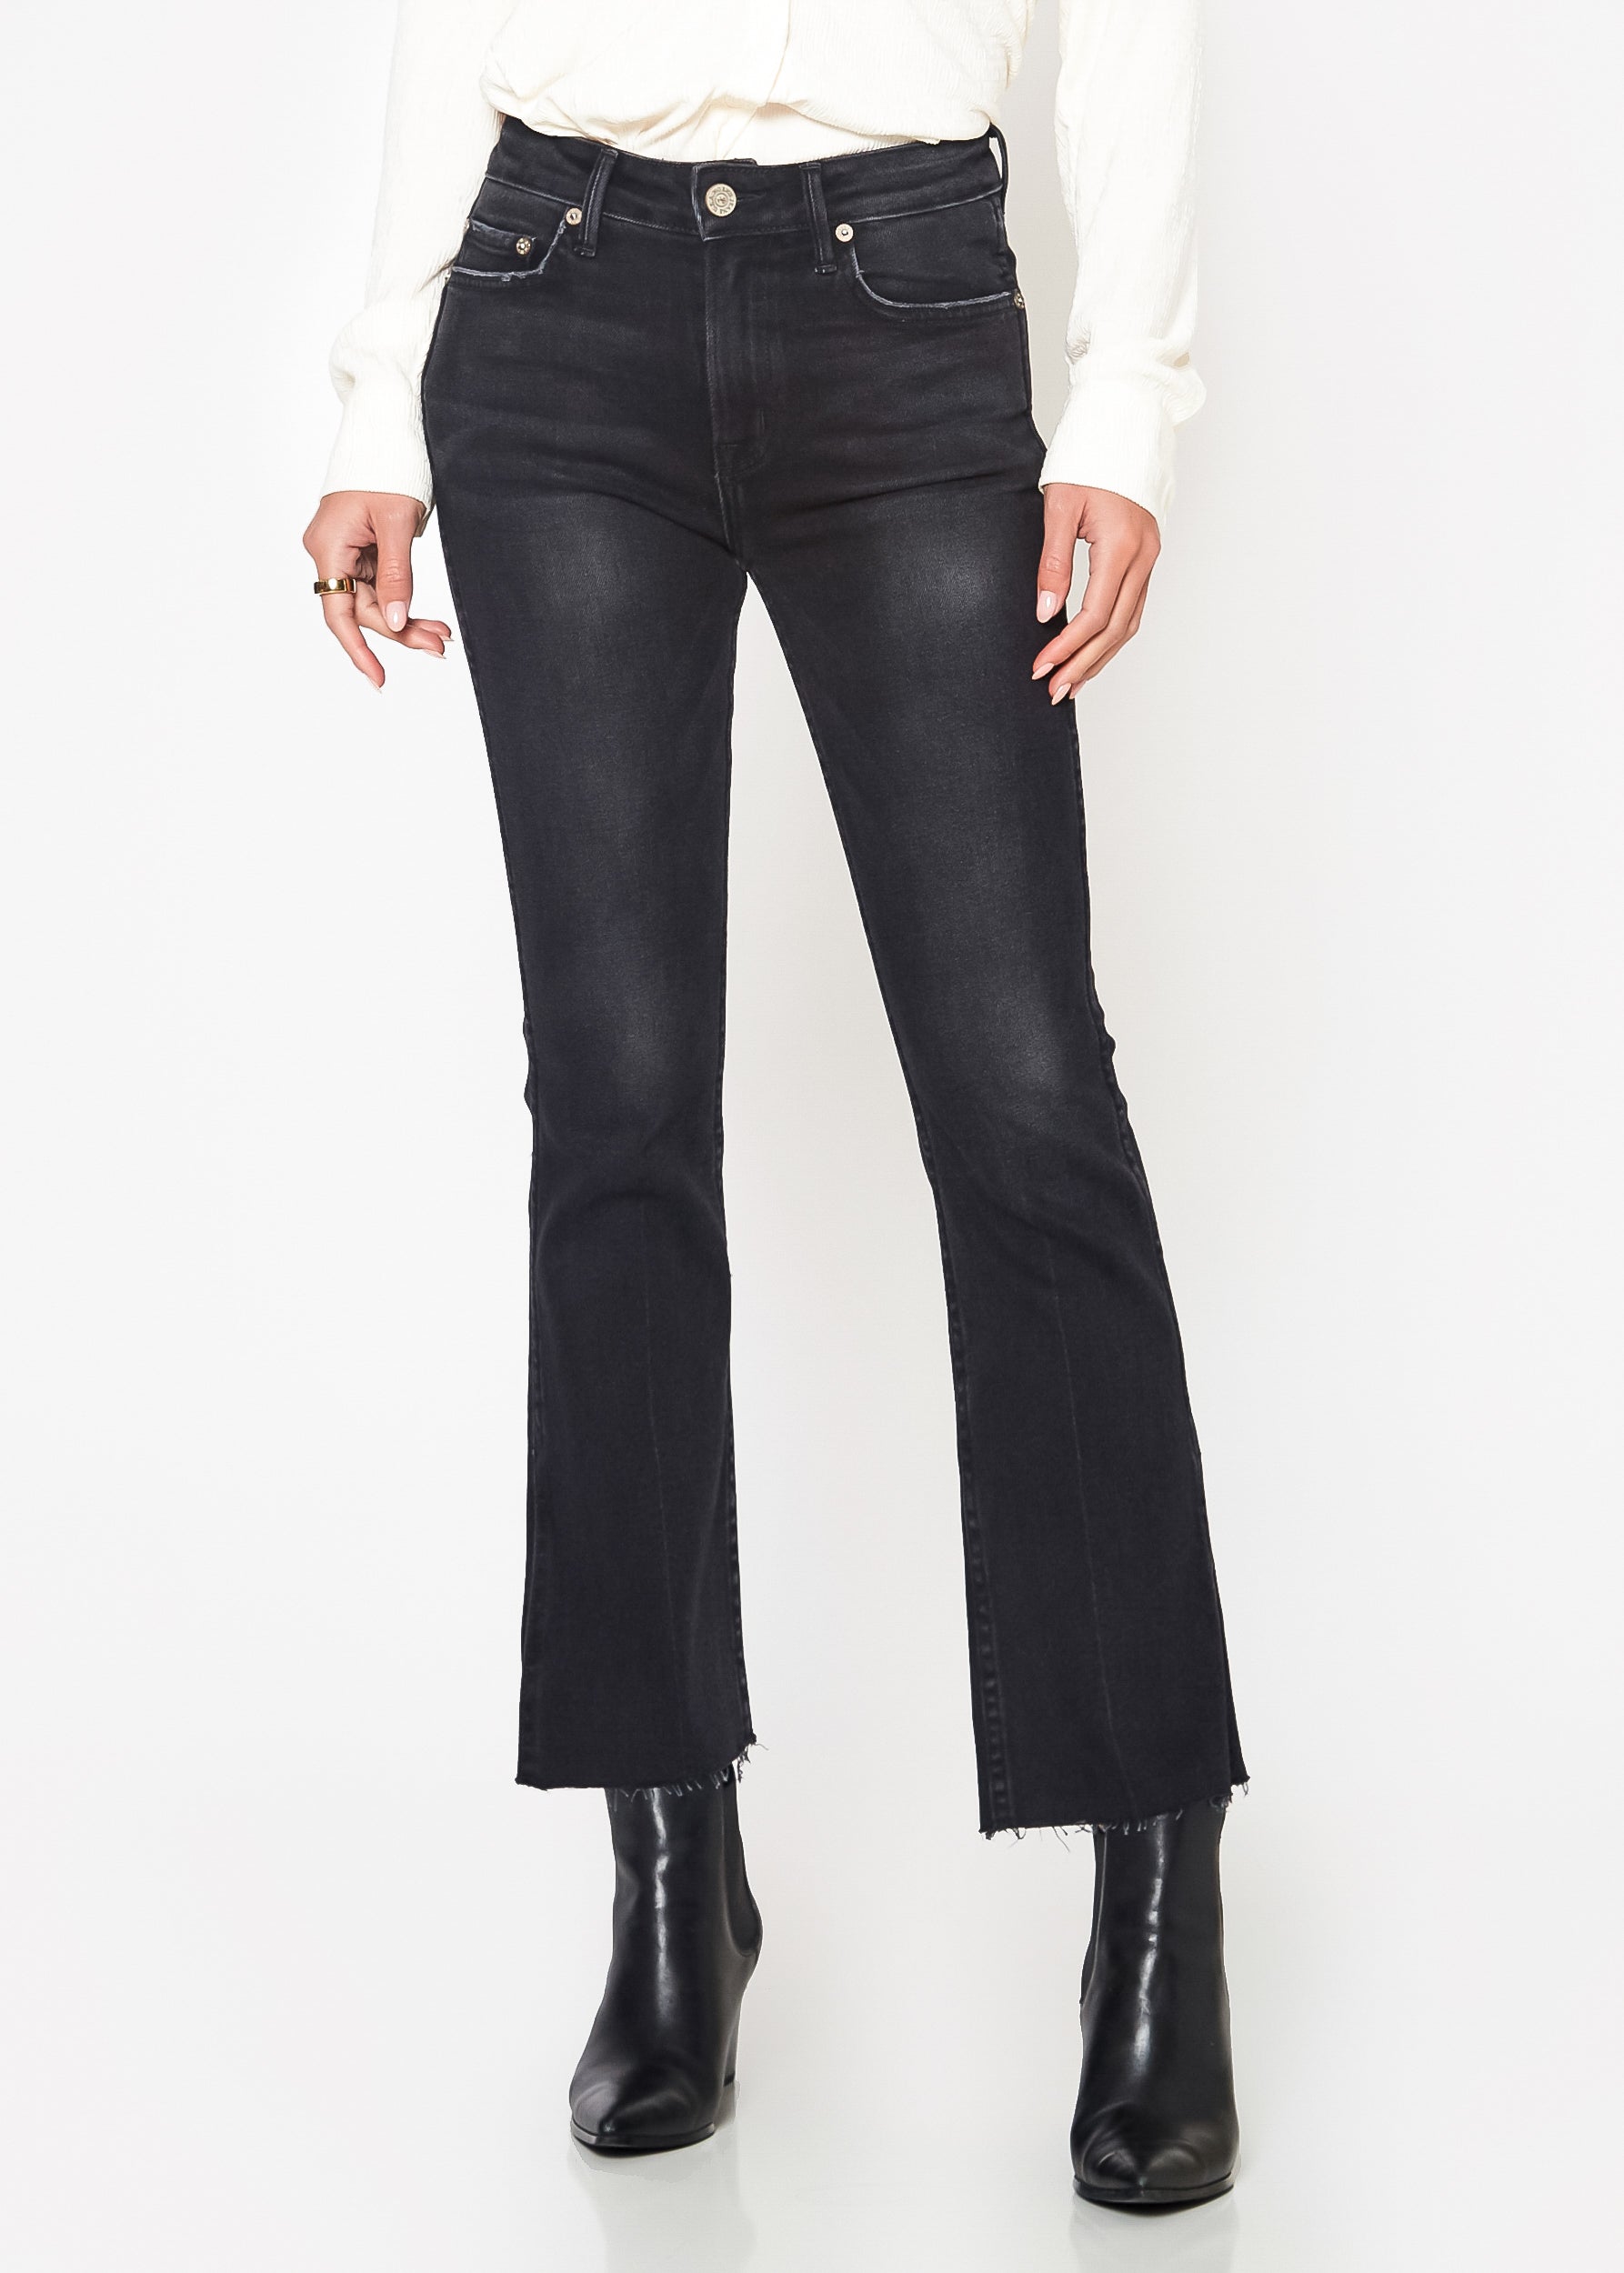 Zara Flared Jeans  Mid rise flare jeans, Black flare jeans, Flare